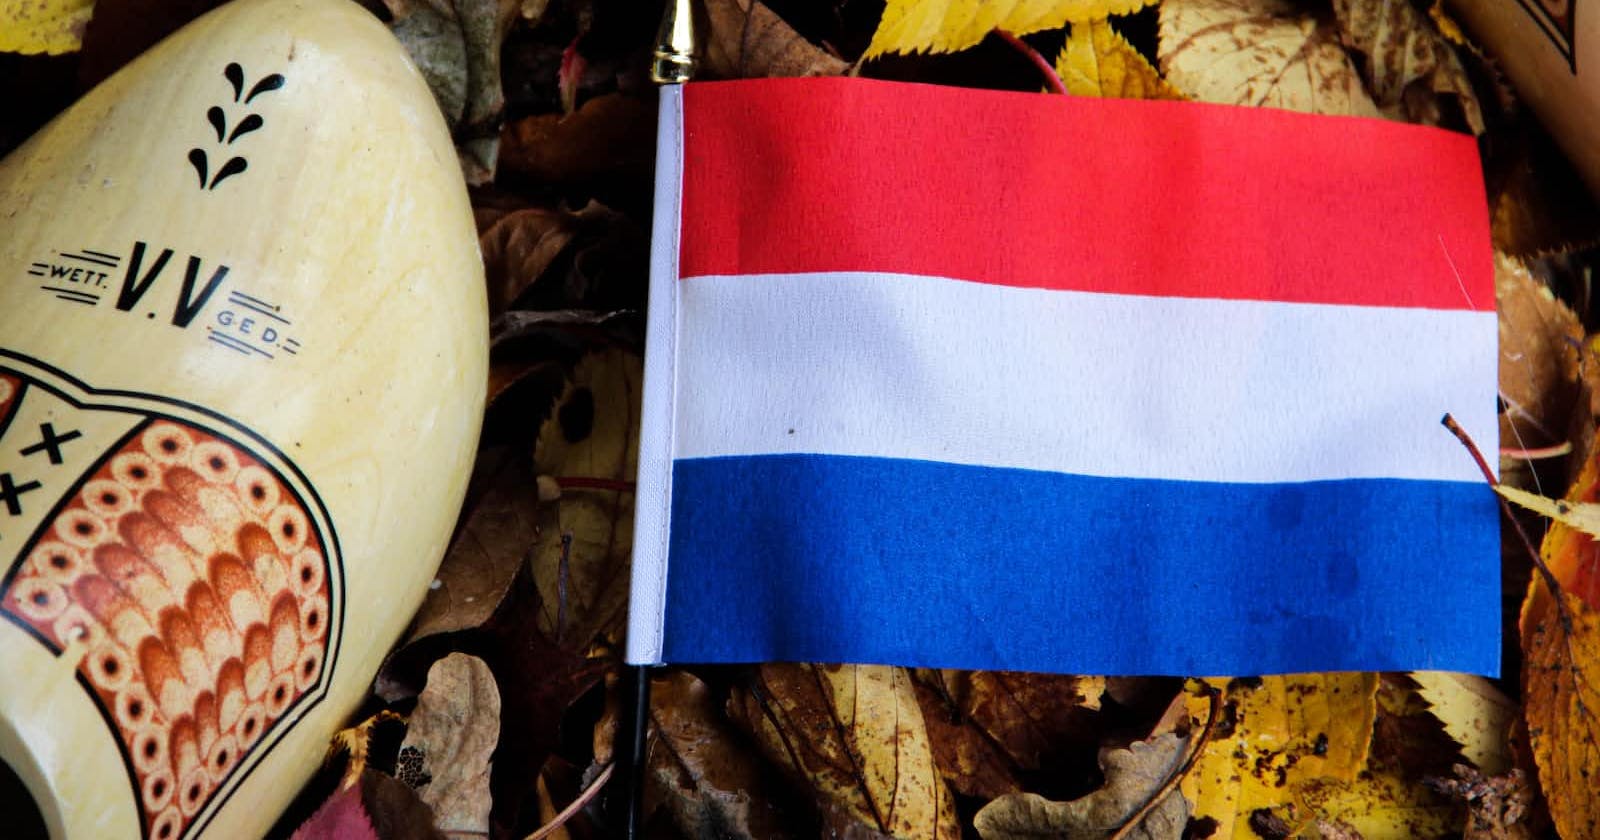 What is Dutch National Flag Problem and how is it related to Sorting?